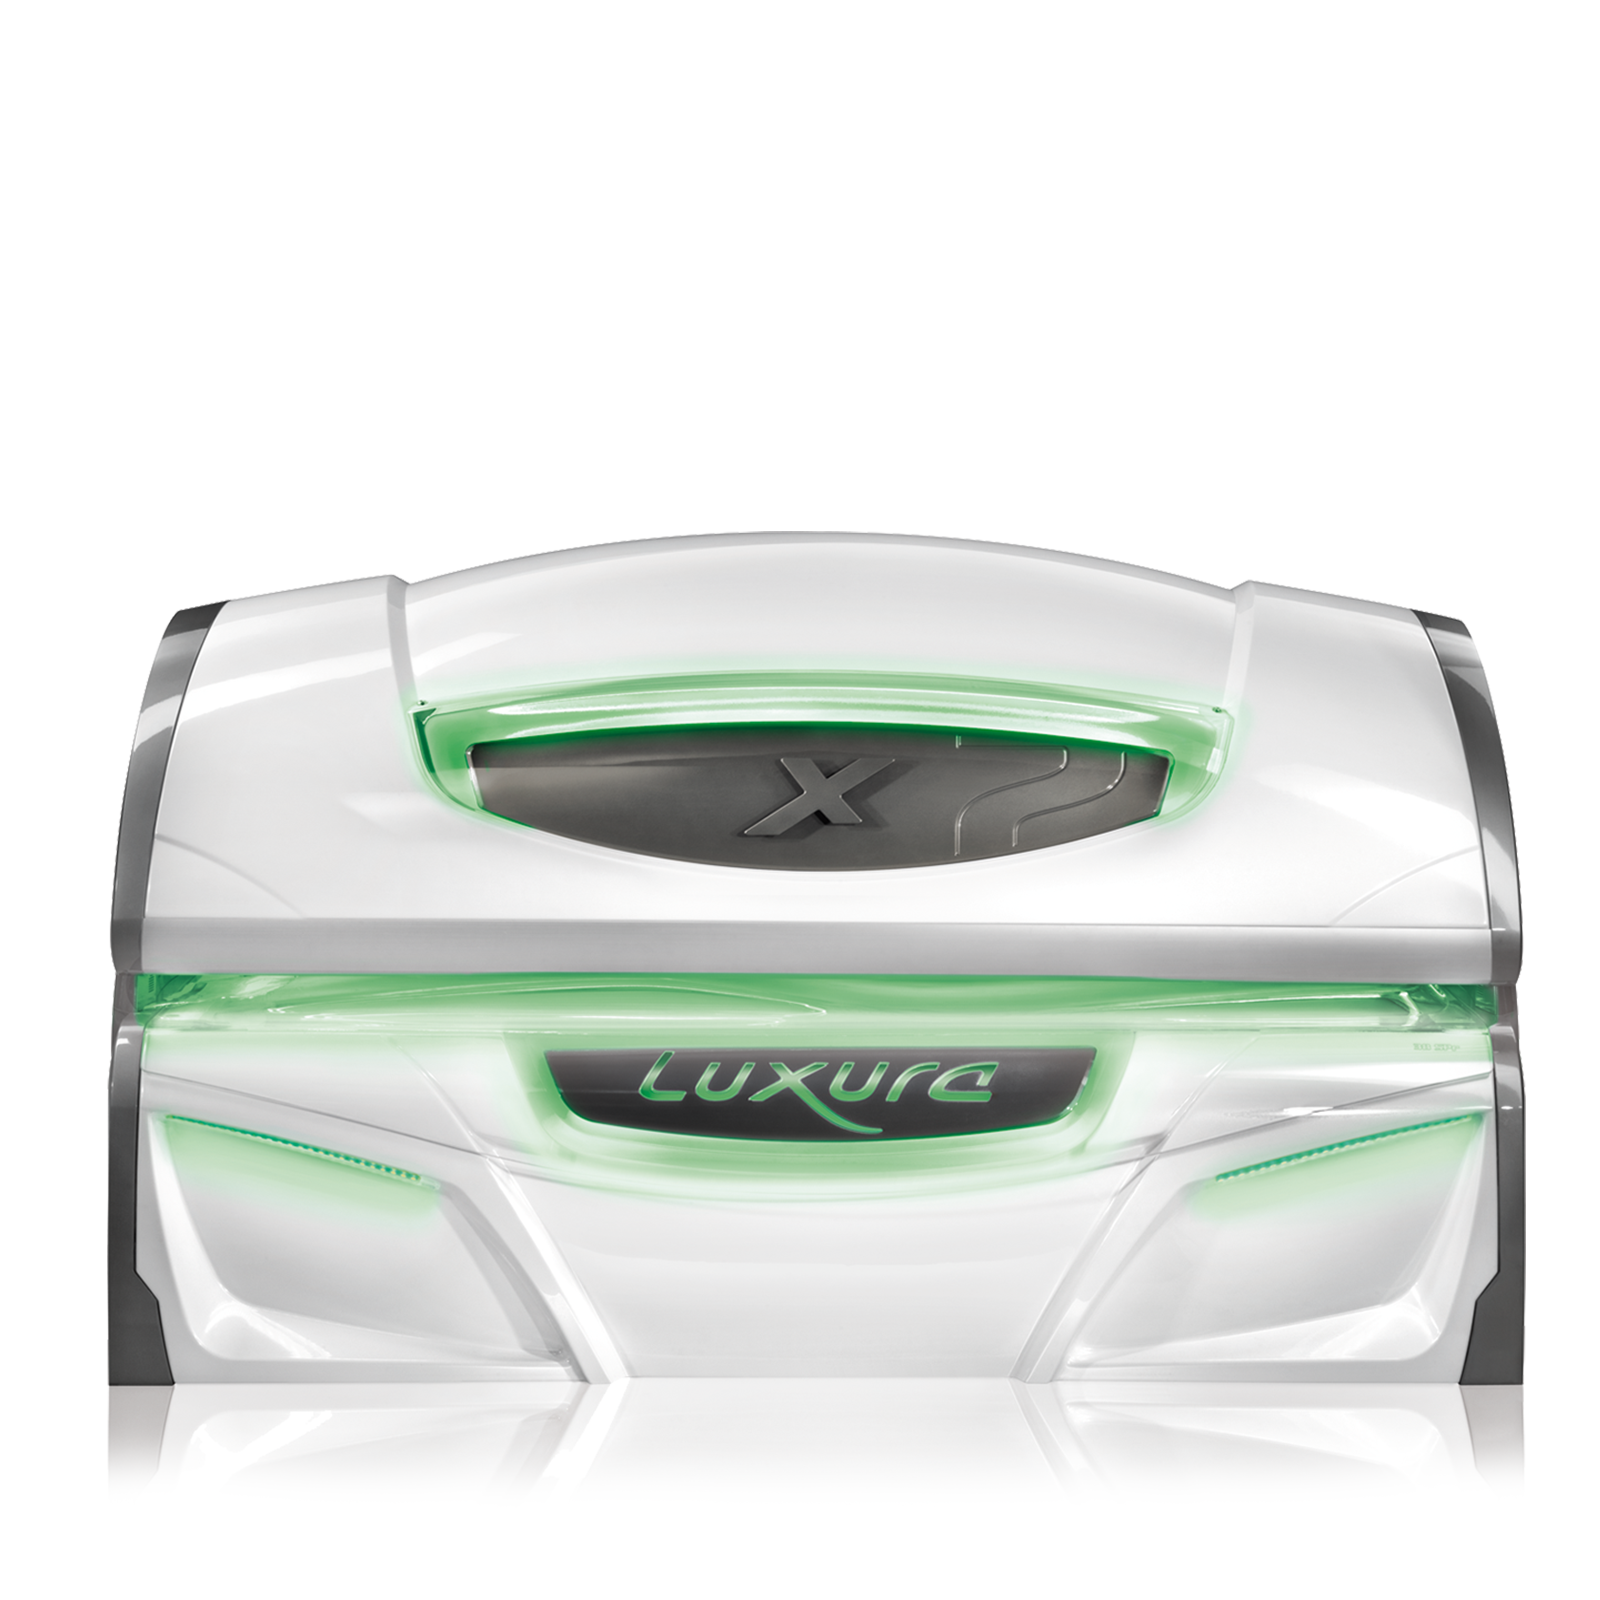 luxura x7 tanning bed closed